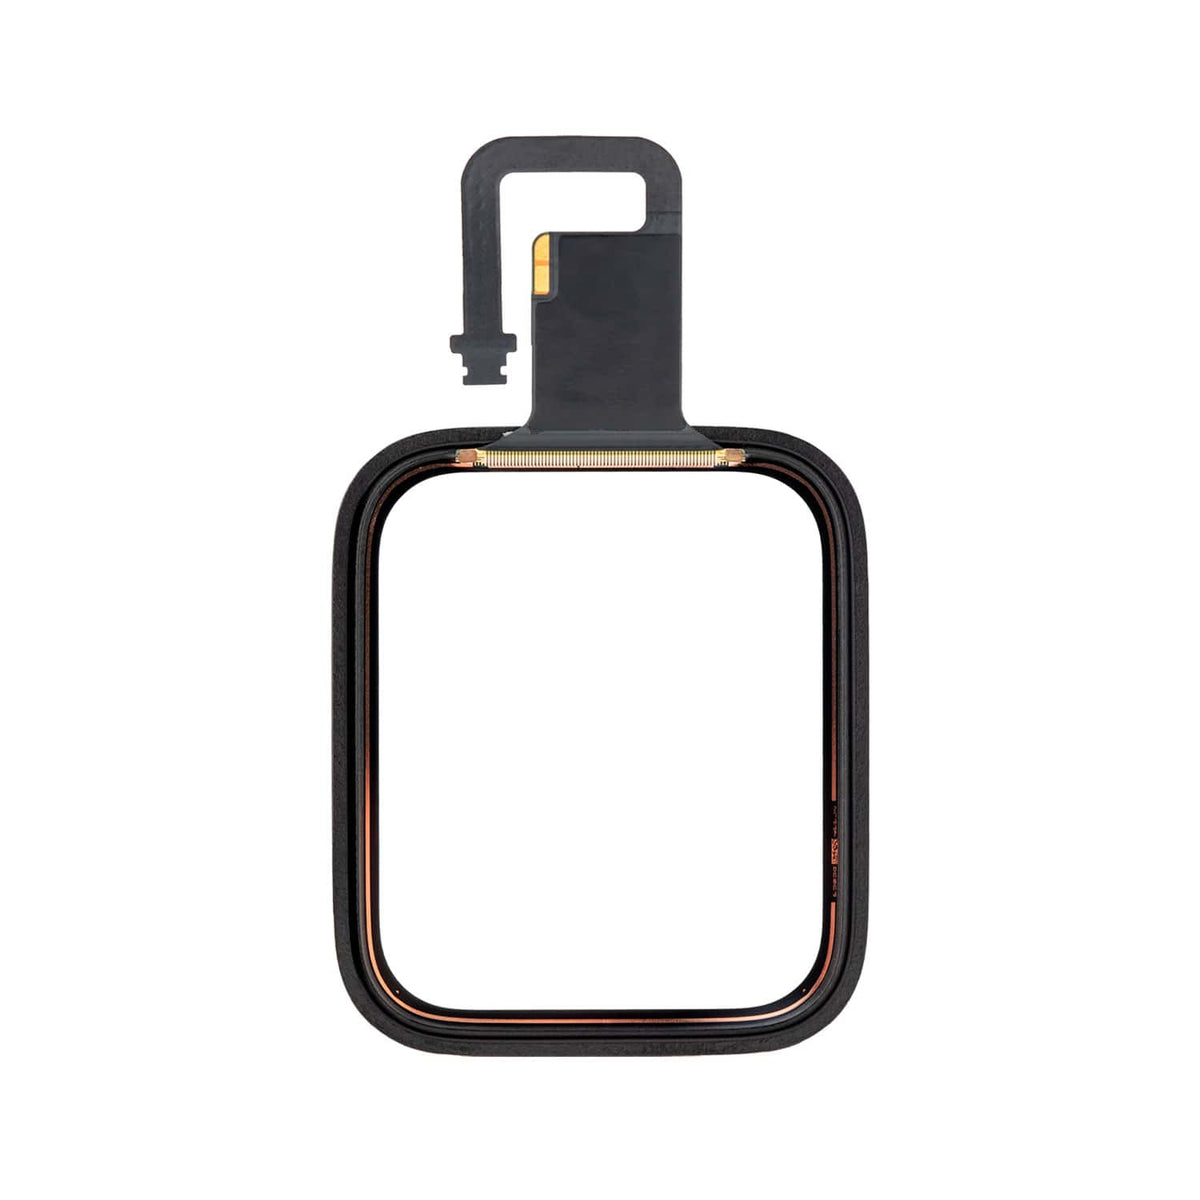 FRONT DIGITIZER FOR APPLE WATCH S6 40MM